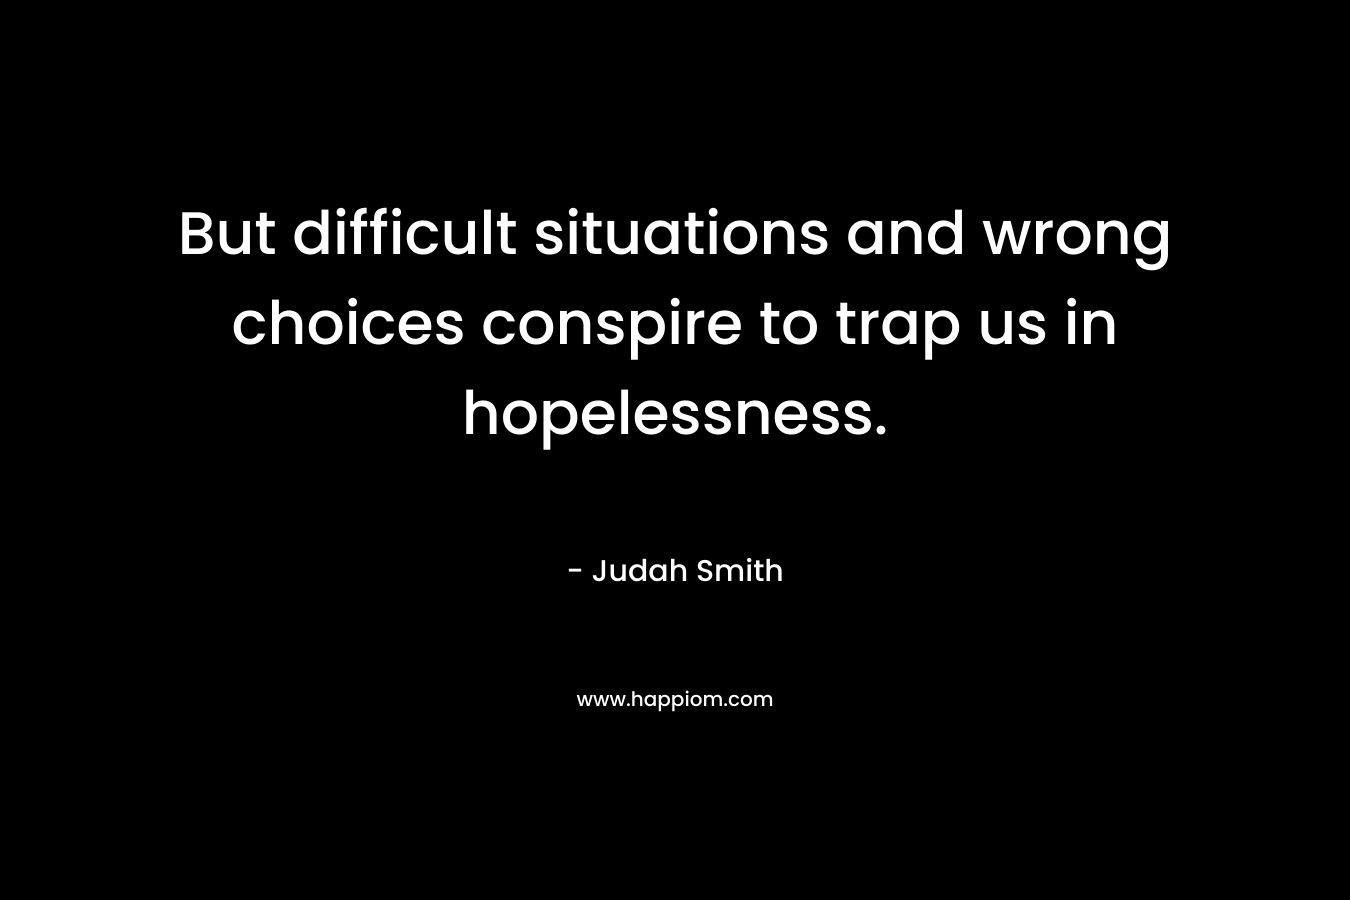 But difficult situations and wrong choices conspire to trap us in hopelessness. – Judah Smith